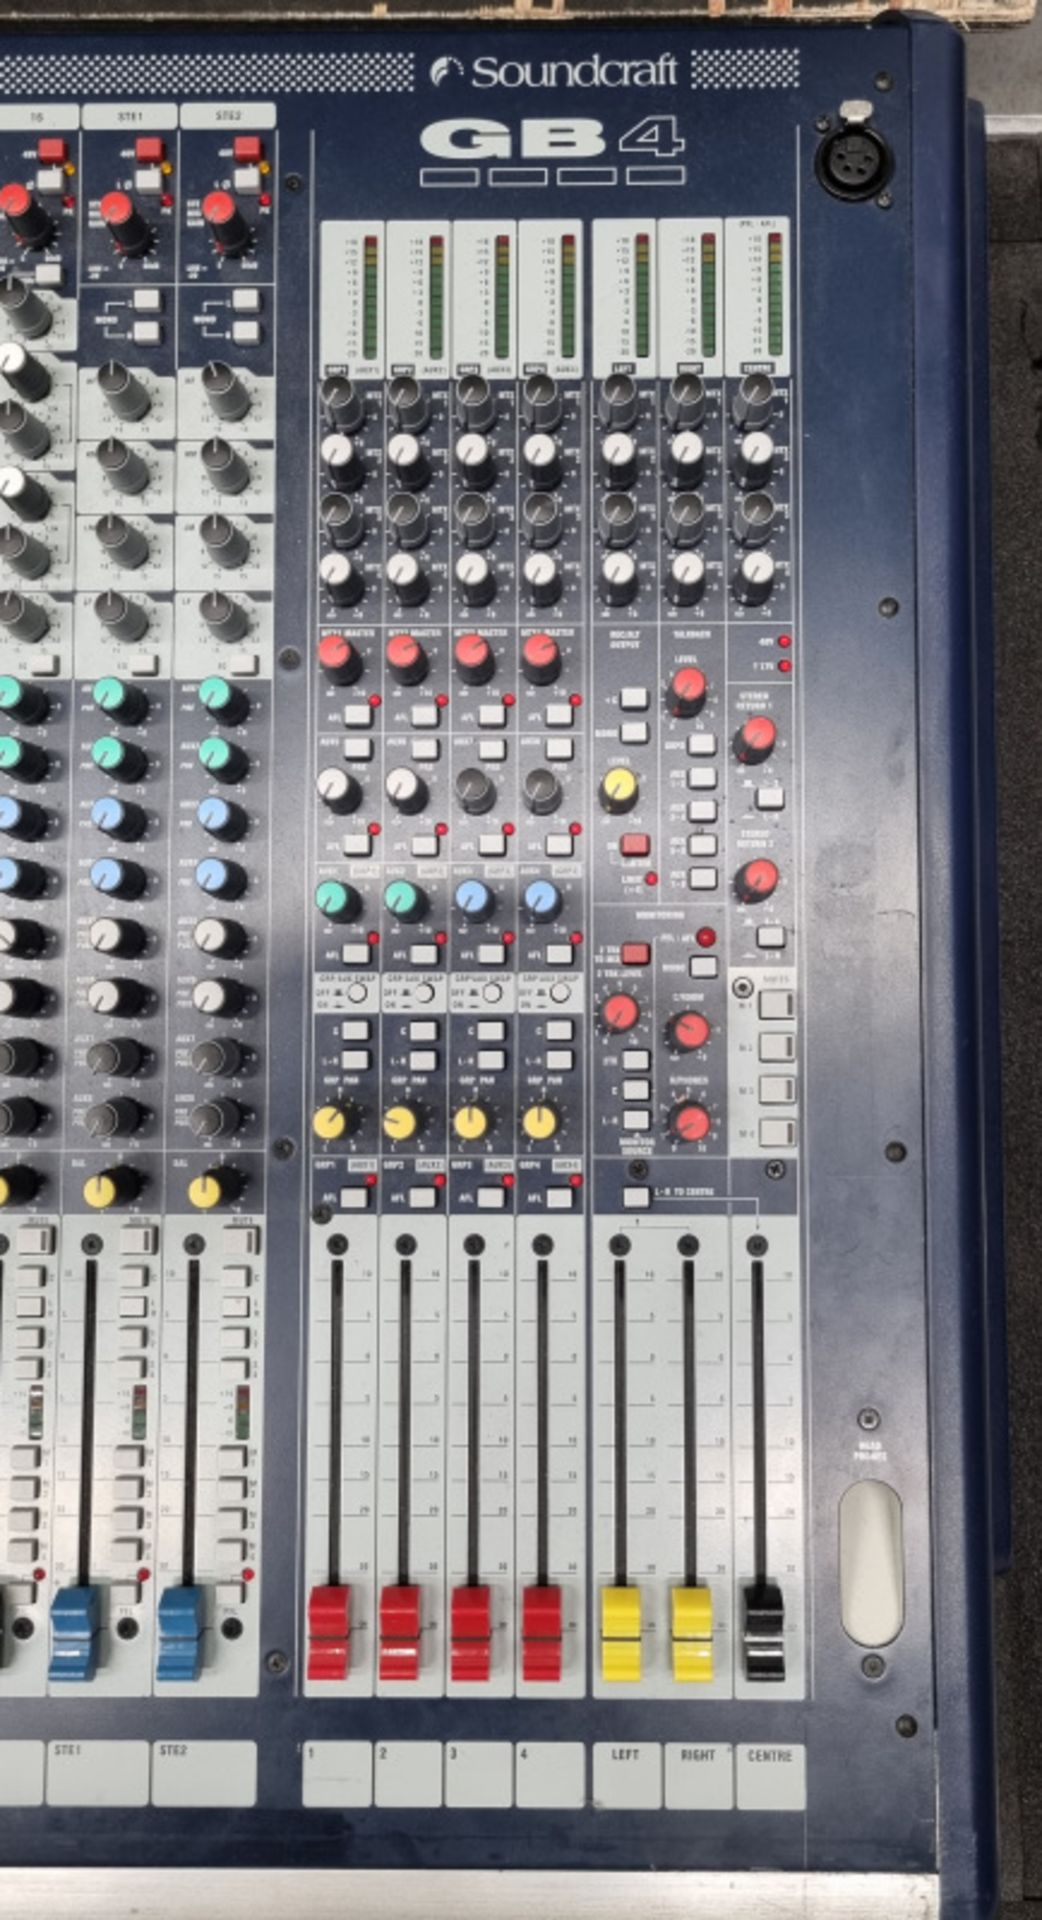 Soundcraft GB4 16 channel mixer in flight case - Image 2 of 5